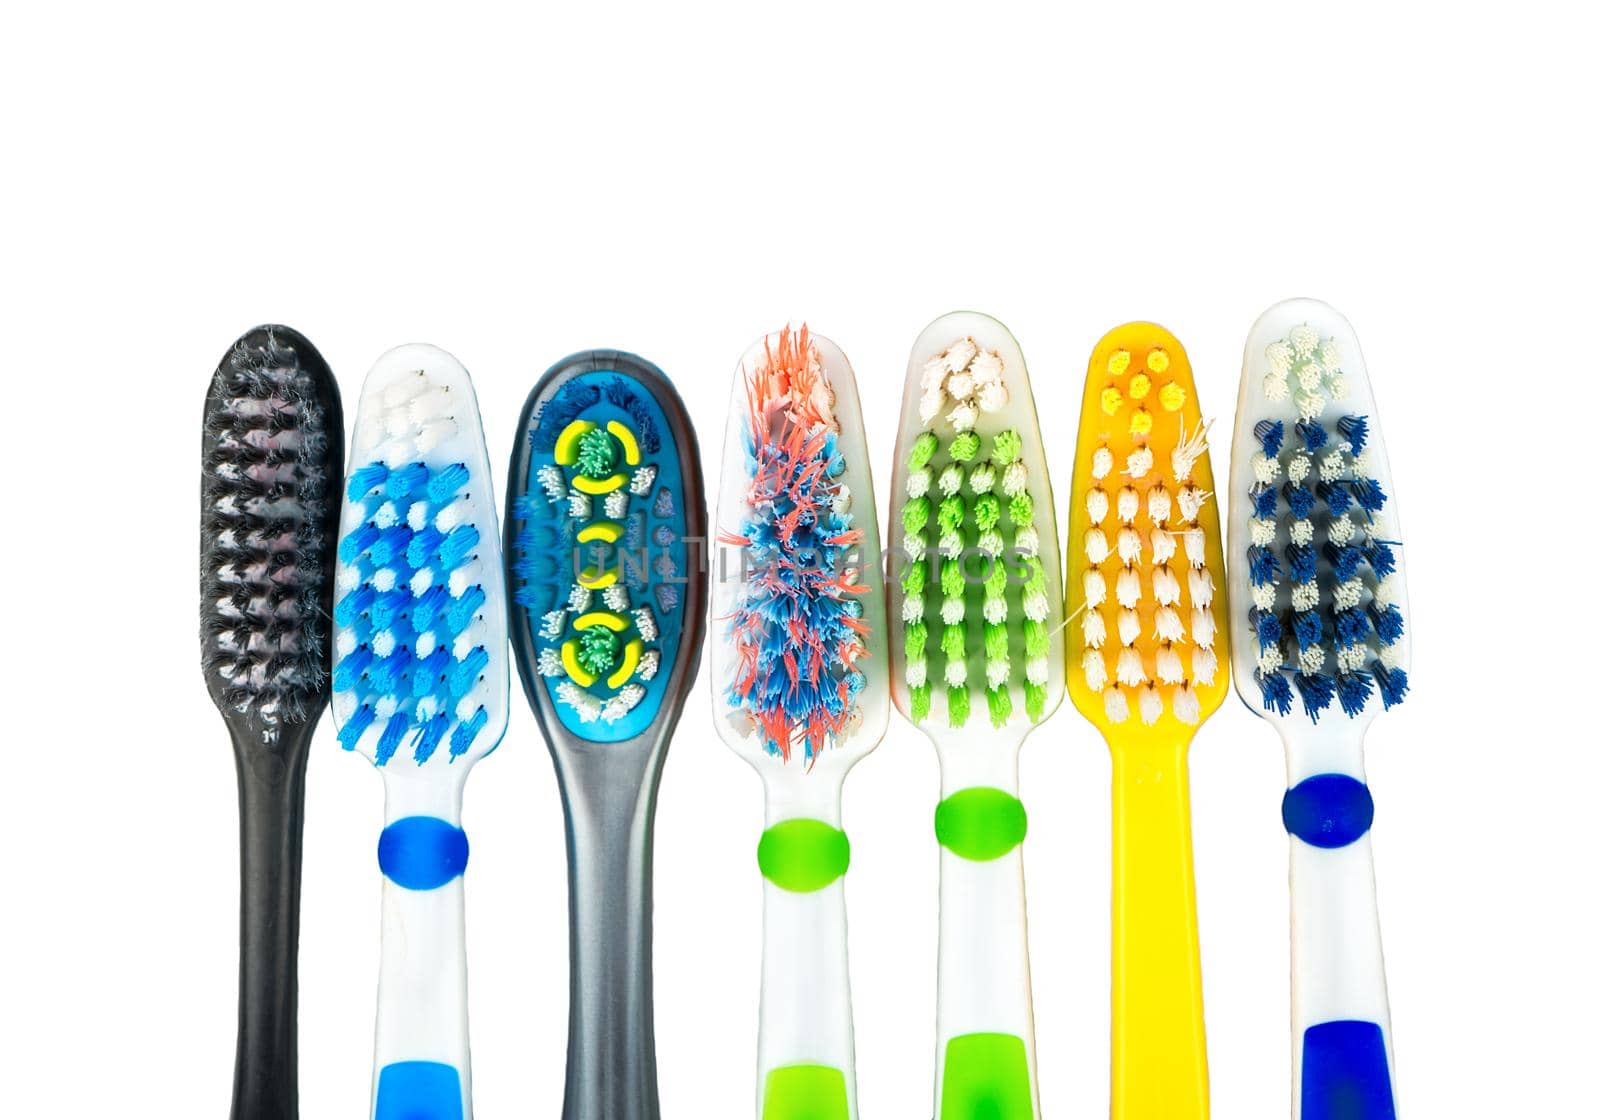 Several multi-colored toothbrushes on a white background